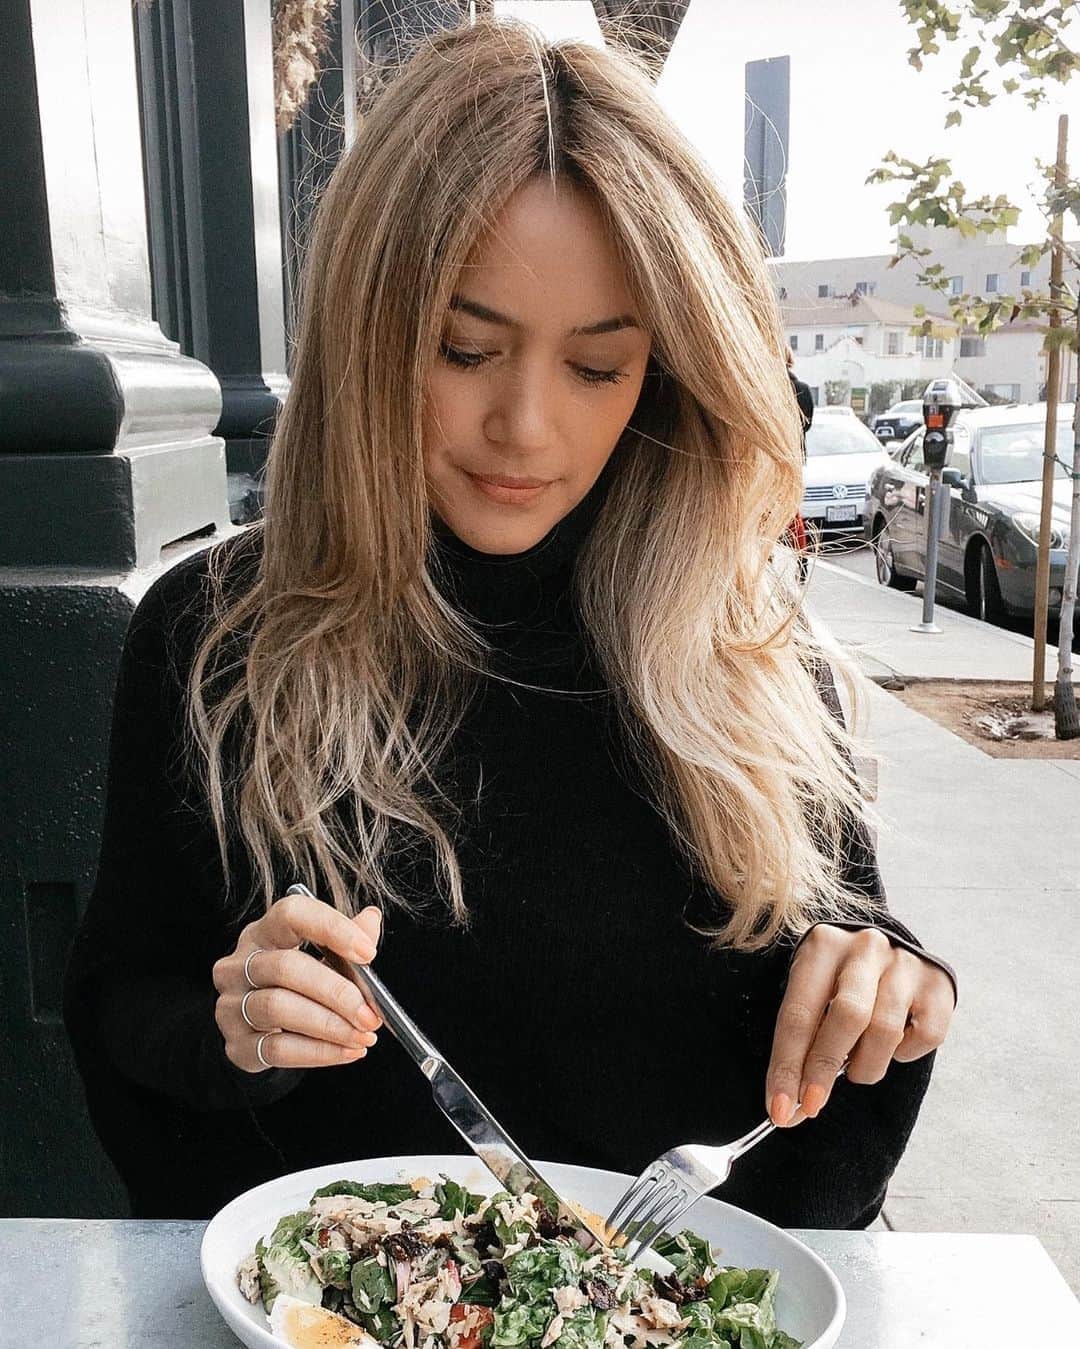 Bianca Cheah Chalmersのインスタグラム：「BLONDE HAIR! Should I go back blonde or stay dark? It took me 7 while months of constant visits to my hair colourist to achieve this look so my hair wouldn’t break off. And now I want a new change again. So yes or no?」